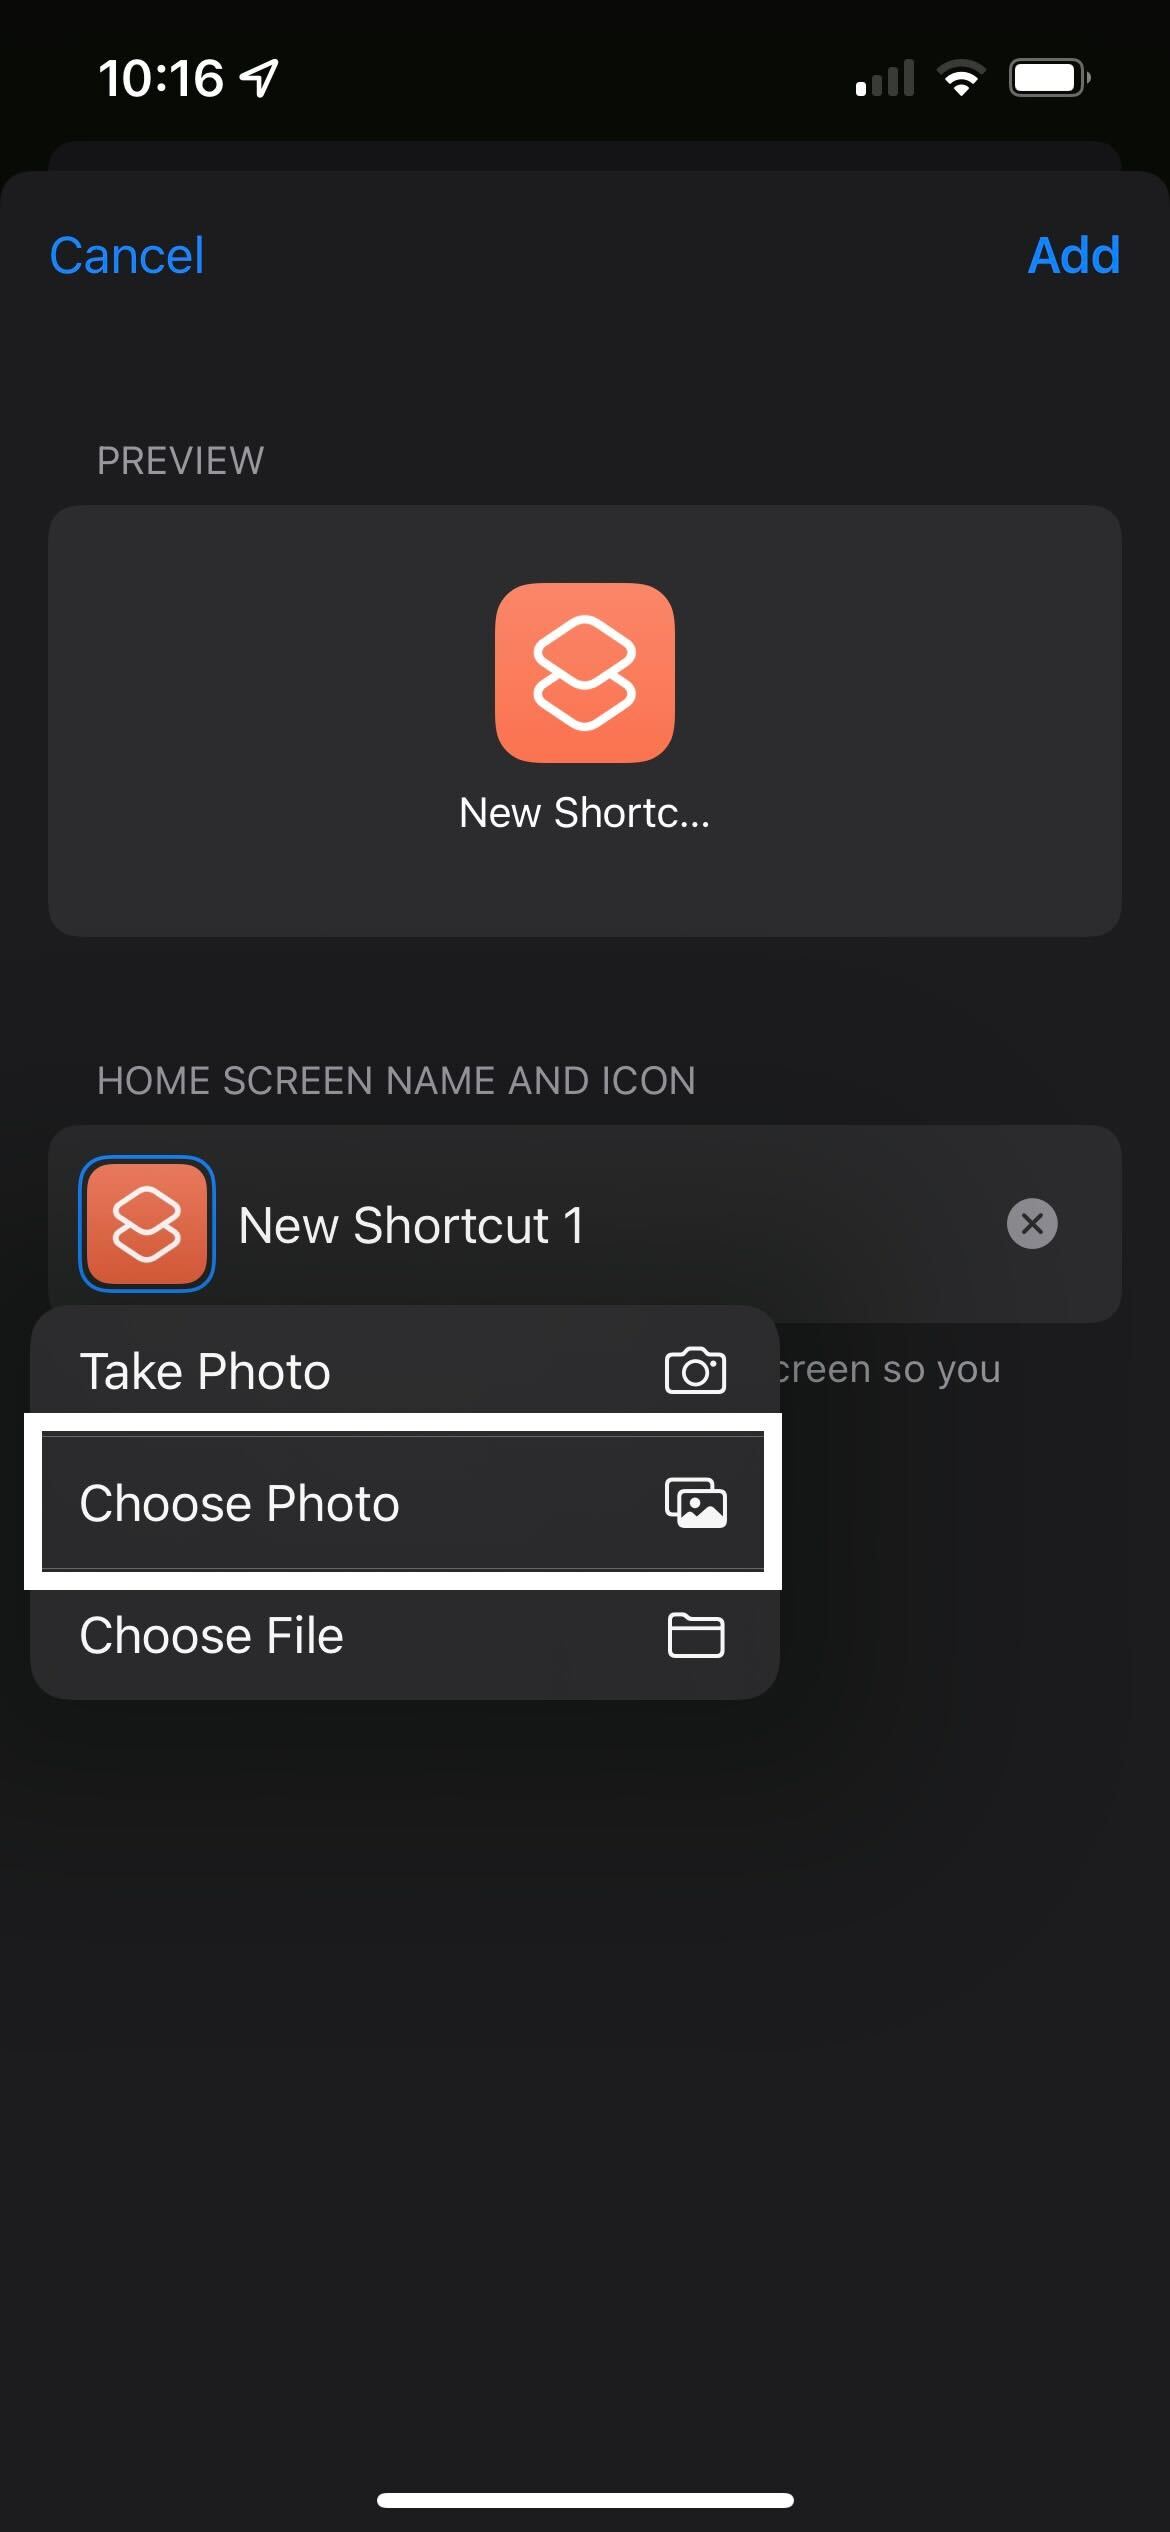 The Choose Photo button on iOS